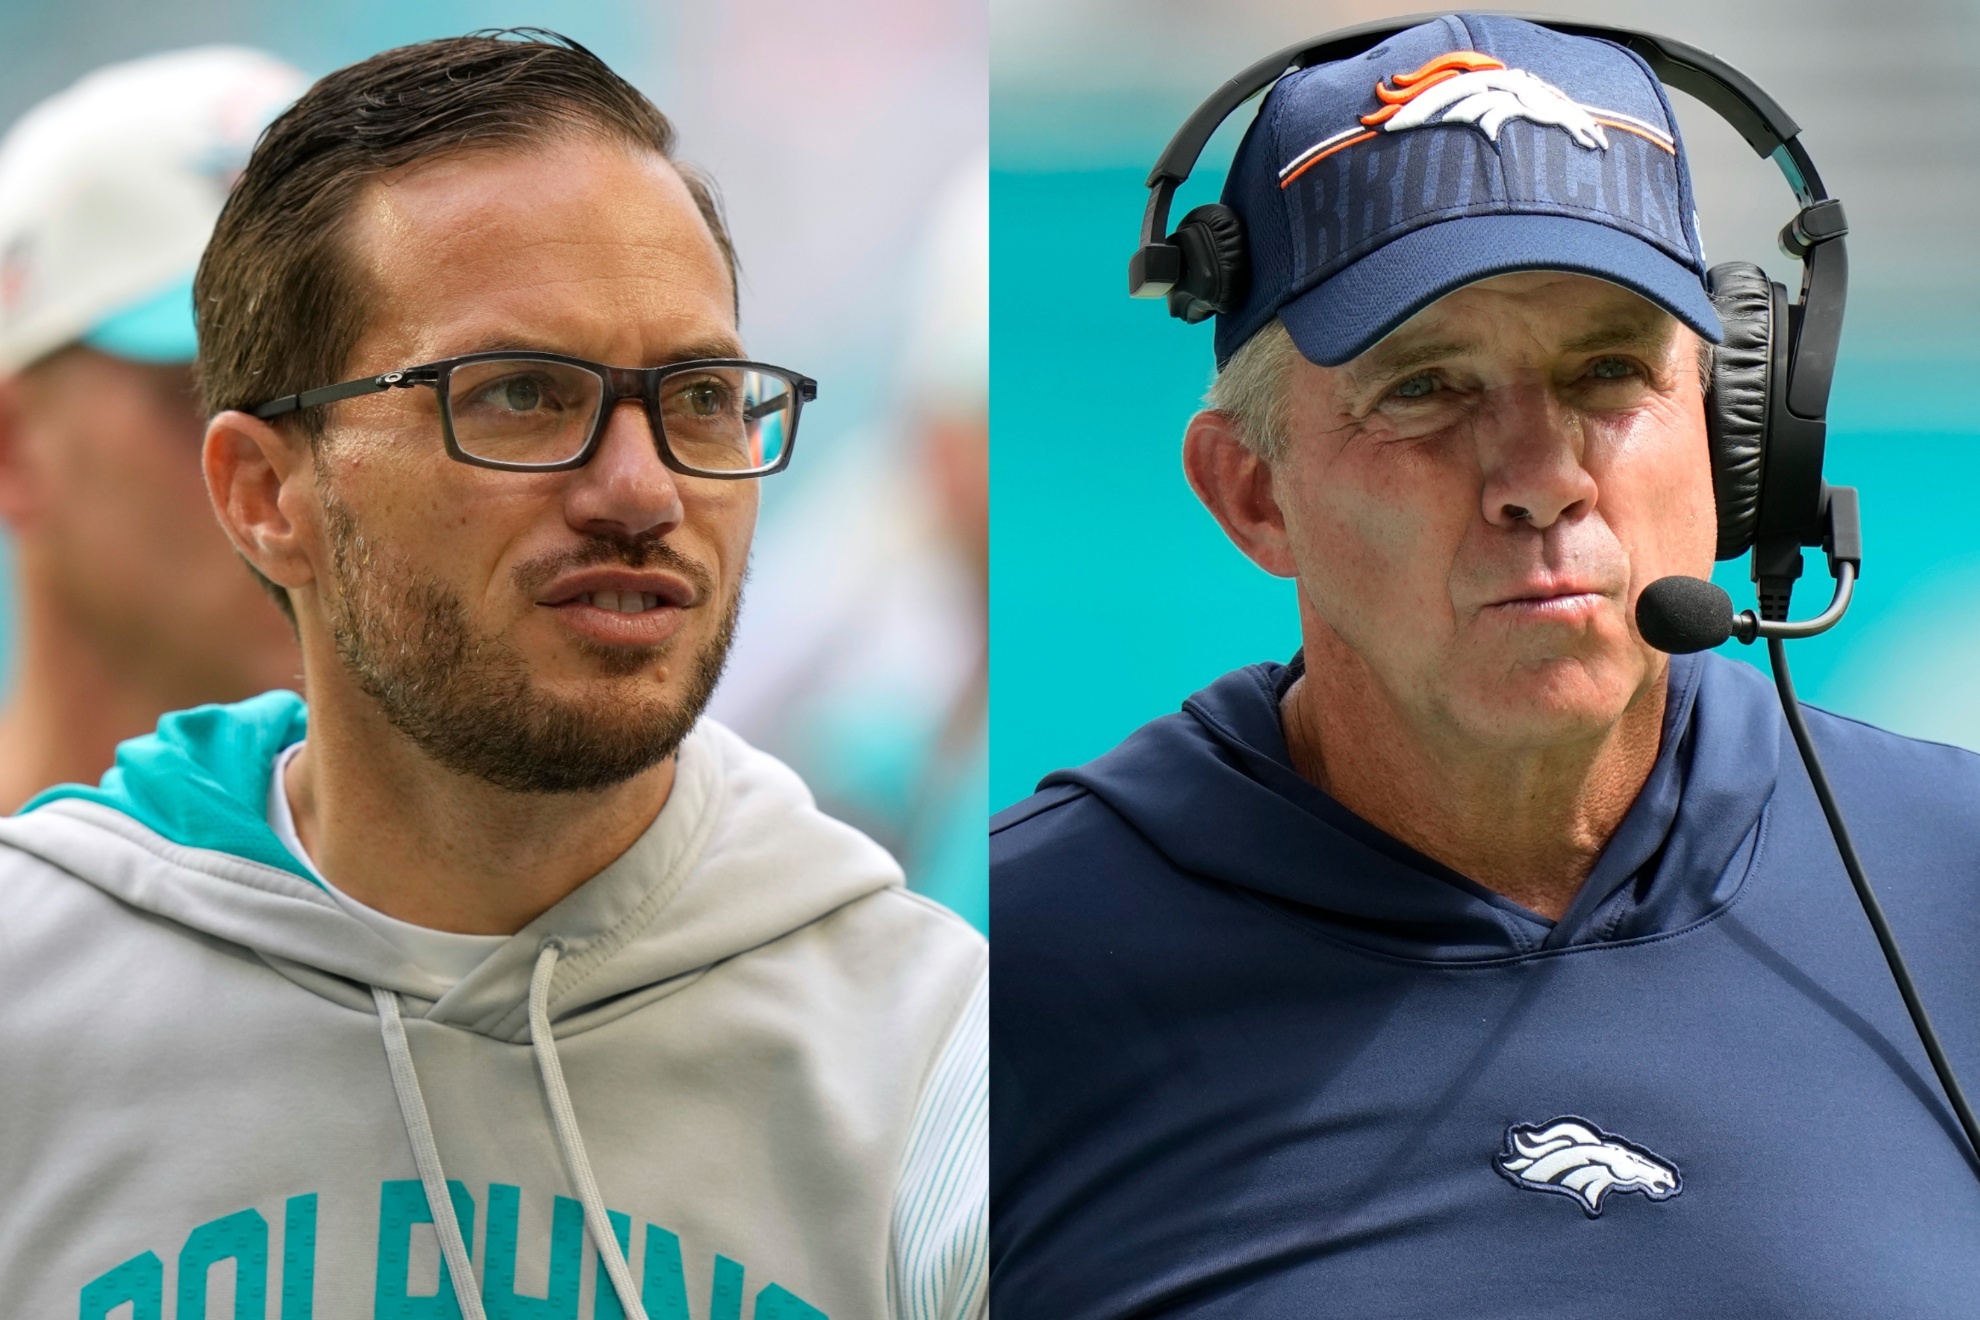 Miami Dolphins and Denver Broncos head coaches: Mike McDaniel (left) and Sean Payton (right).